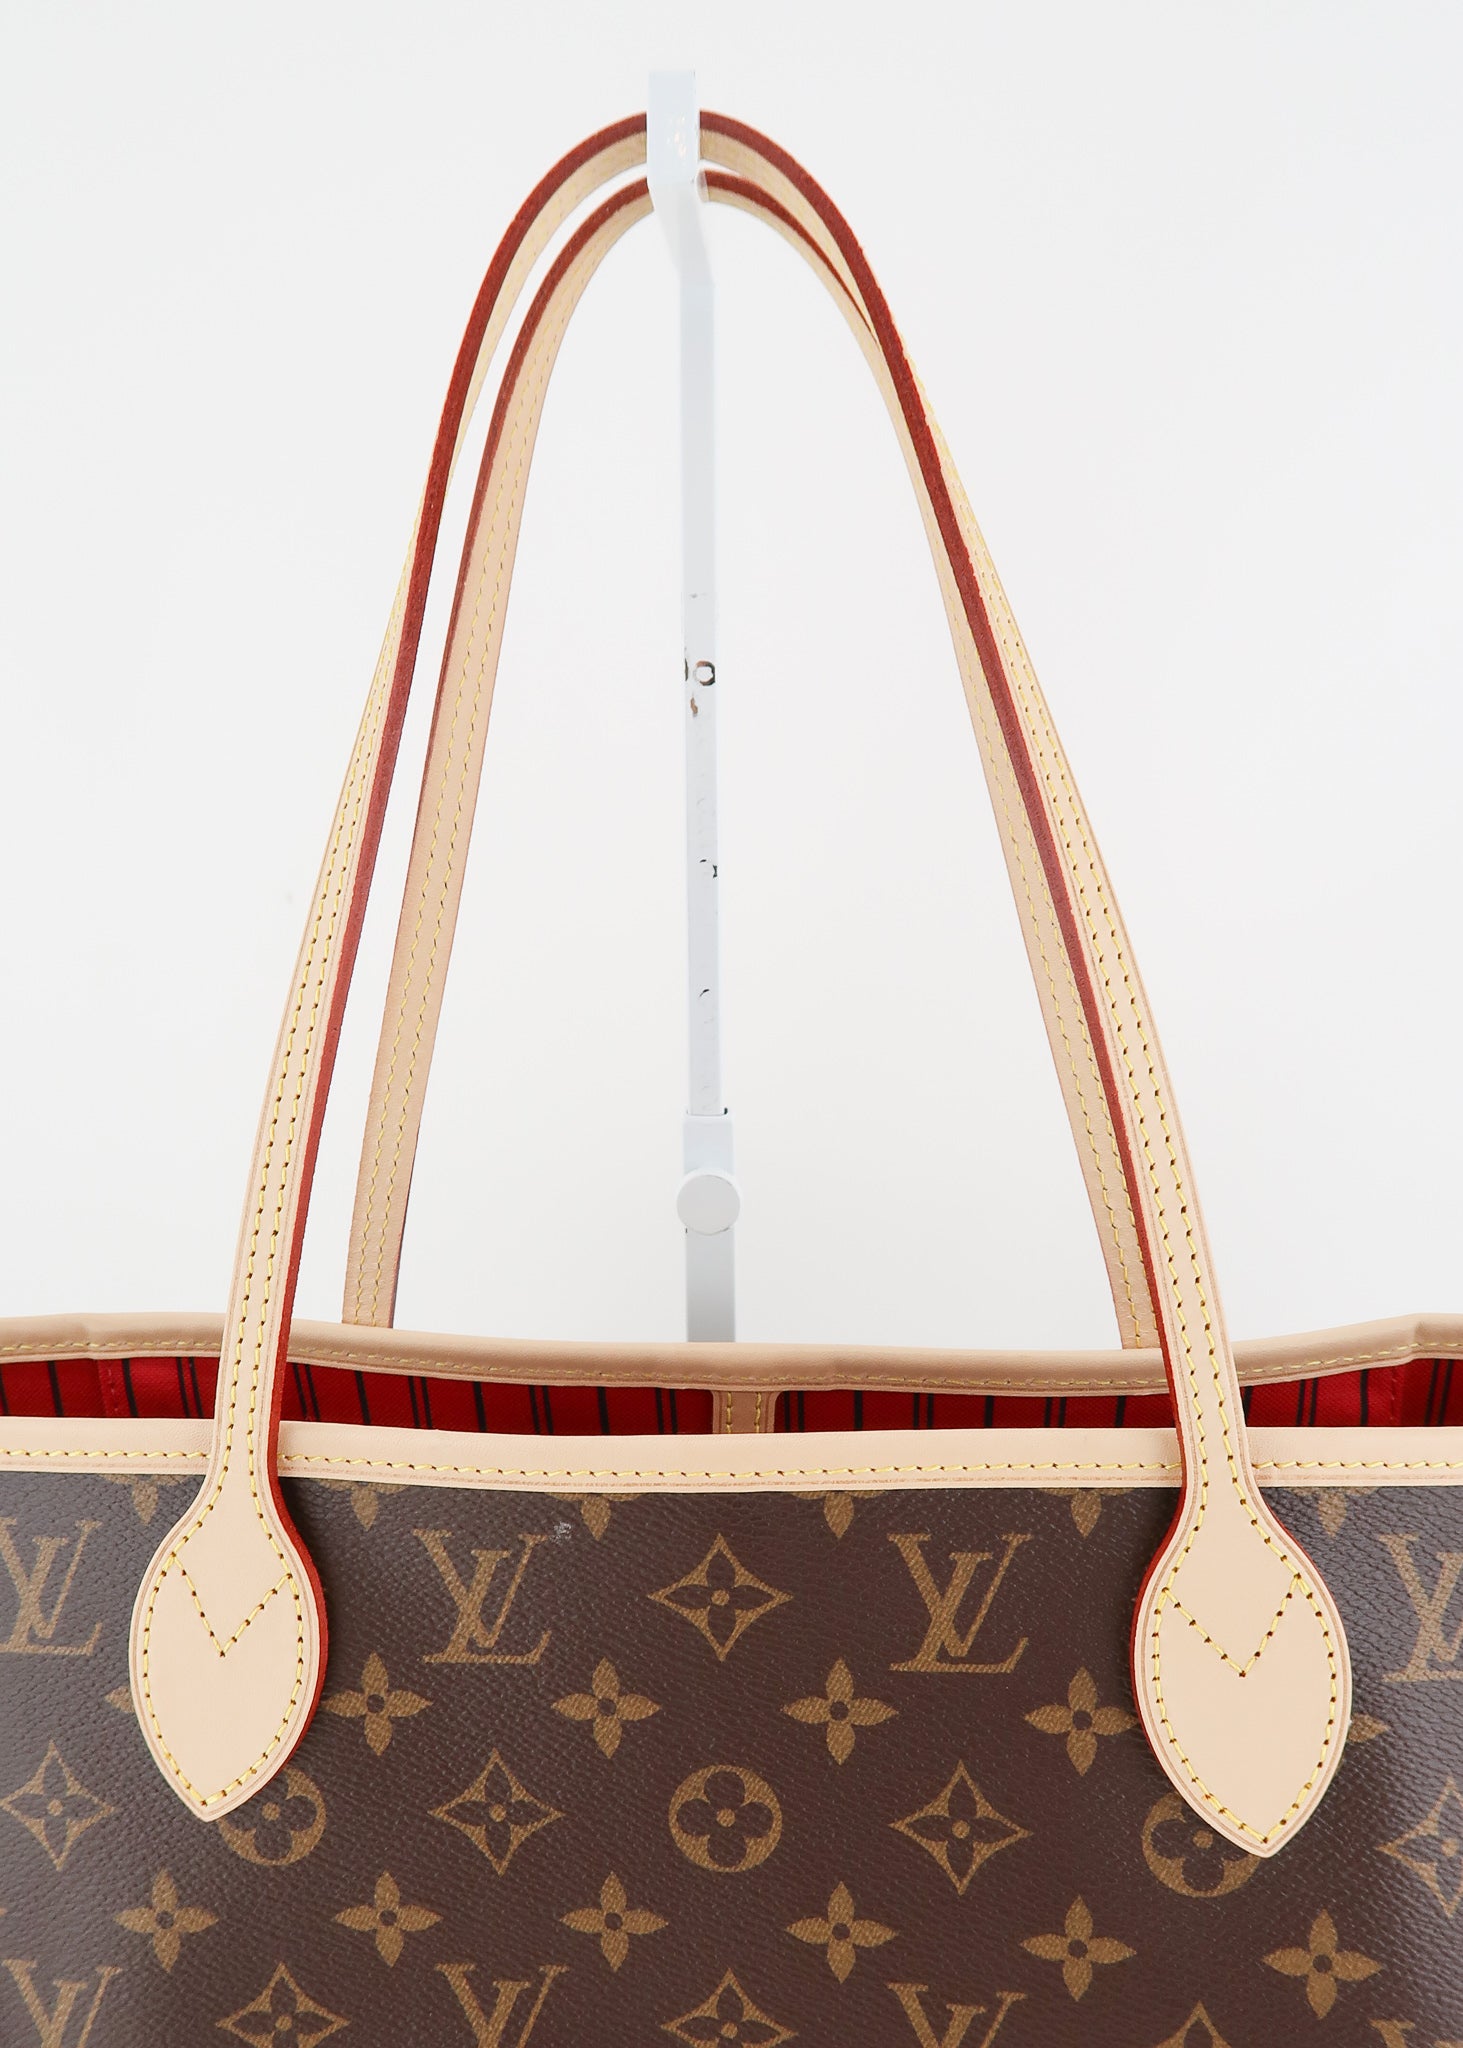 louis vuitton red neverfull